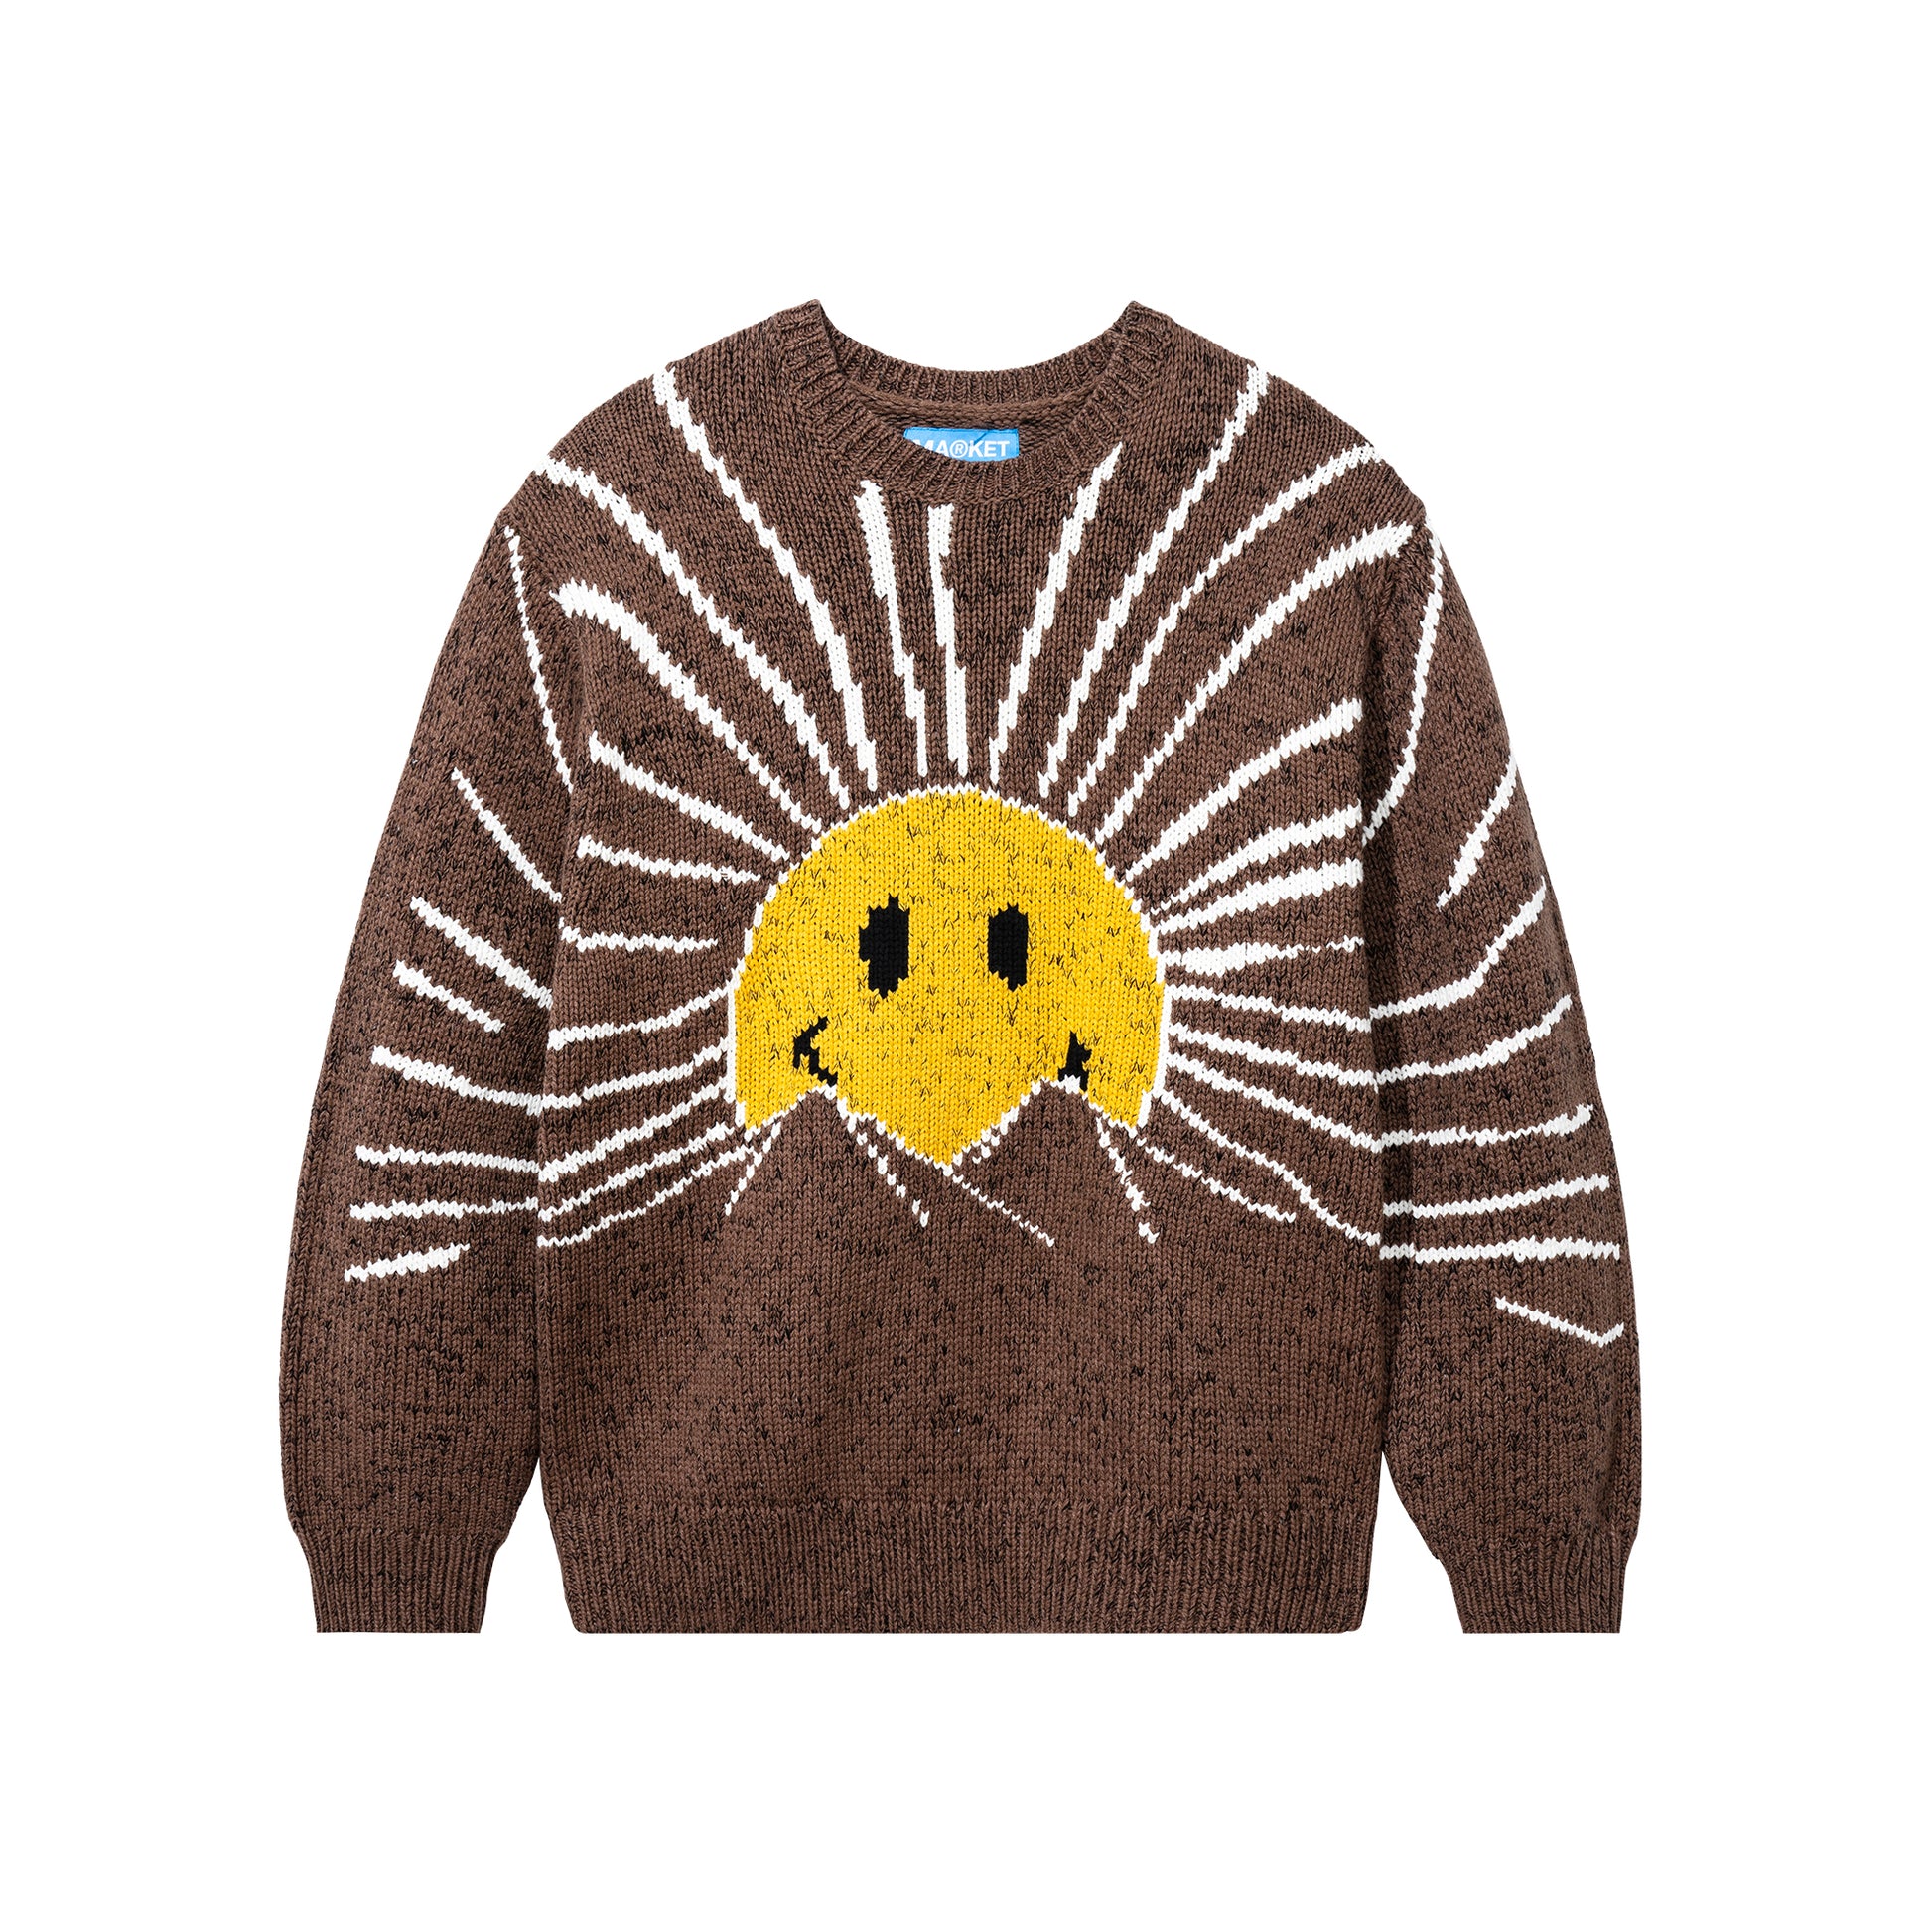 MARKET clothing brand SMILEY SUNRISE SWEATER. Find more graphic tees, jackets, cardigans and more at MarketStudios.com. Formally Chinatown Market.